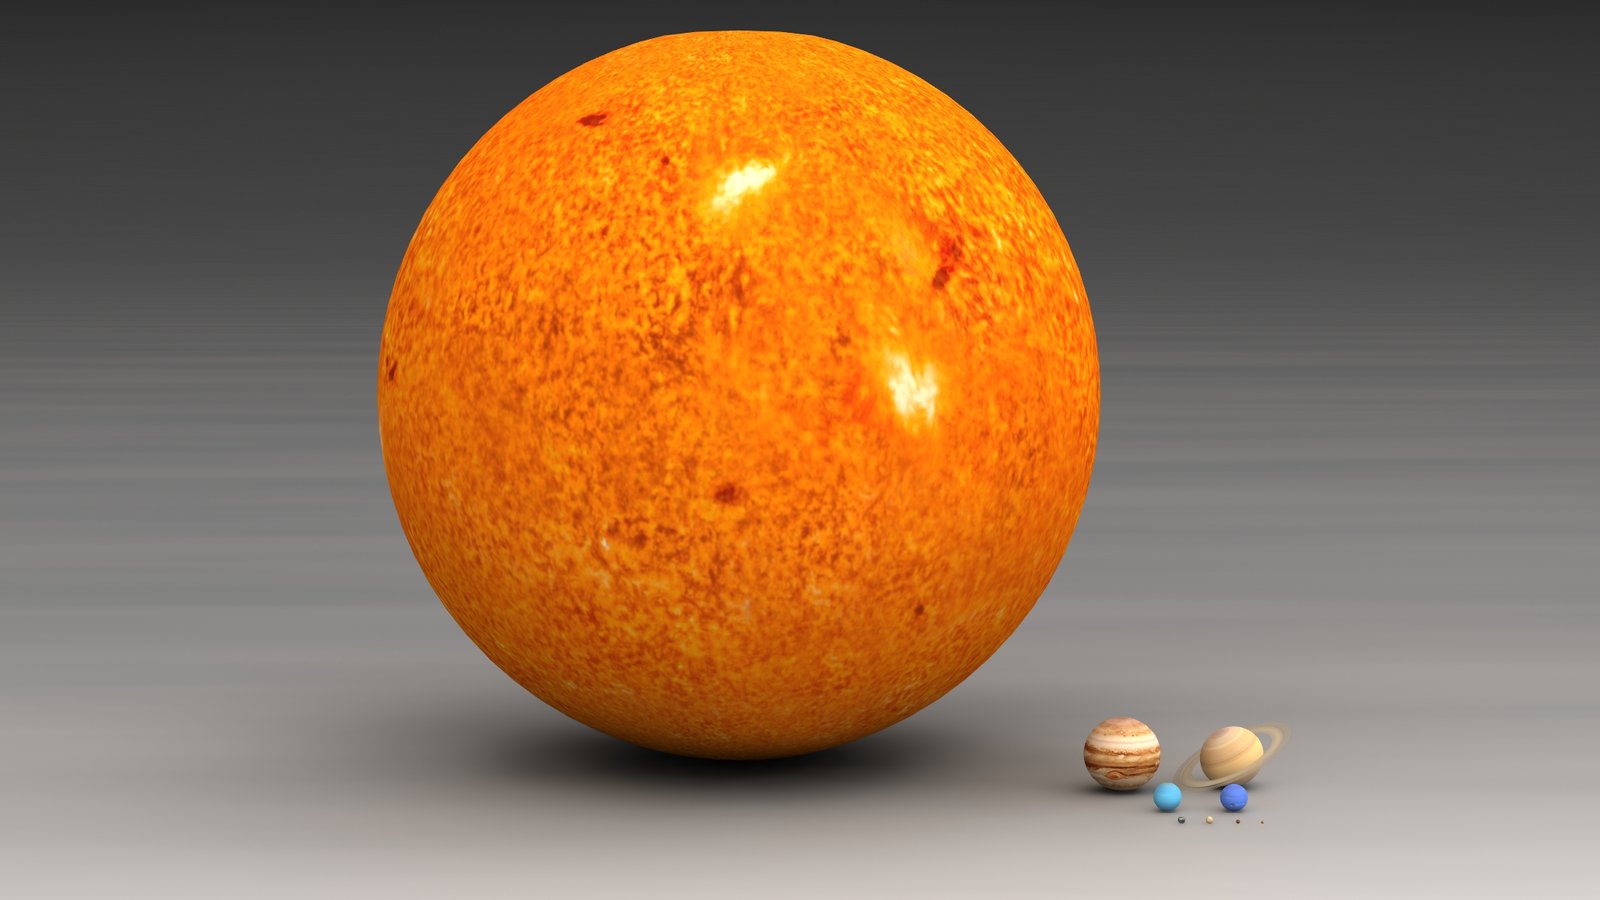 It would take 1.3 million Earths to fill up the Sun